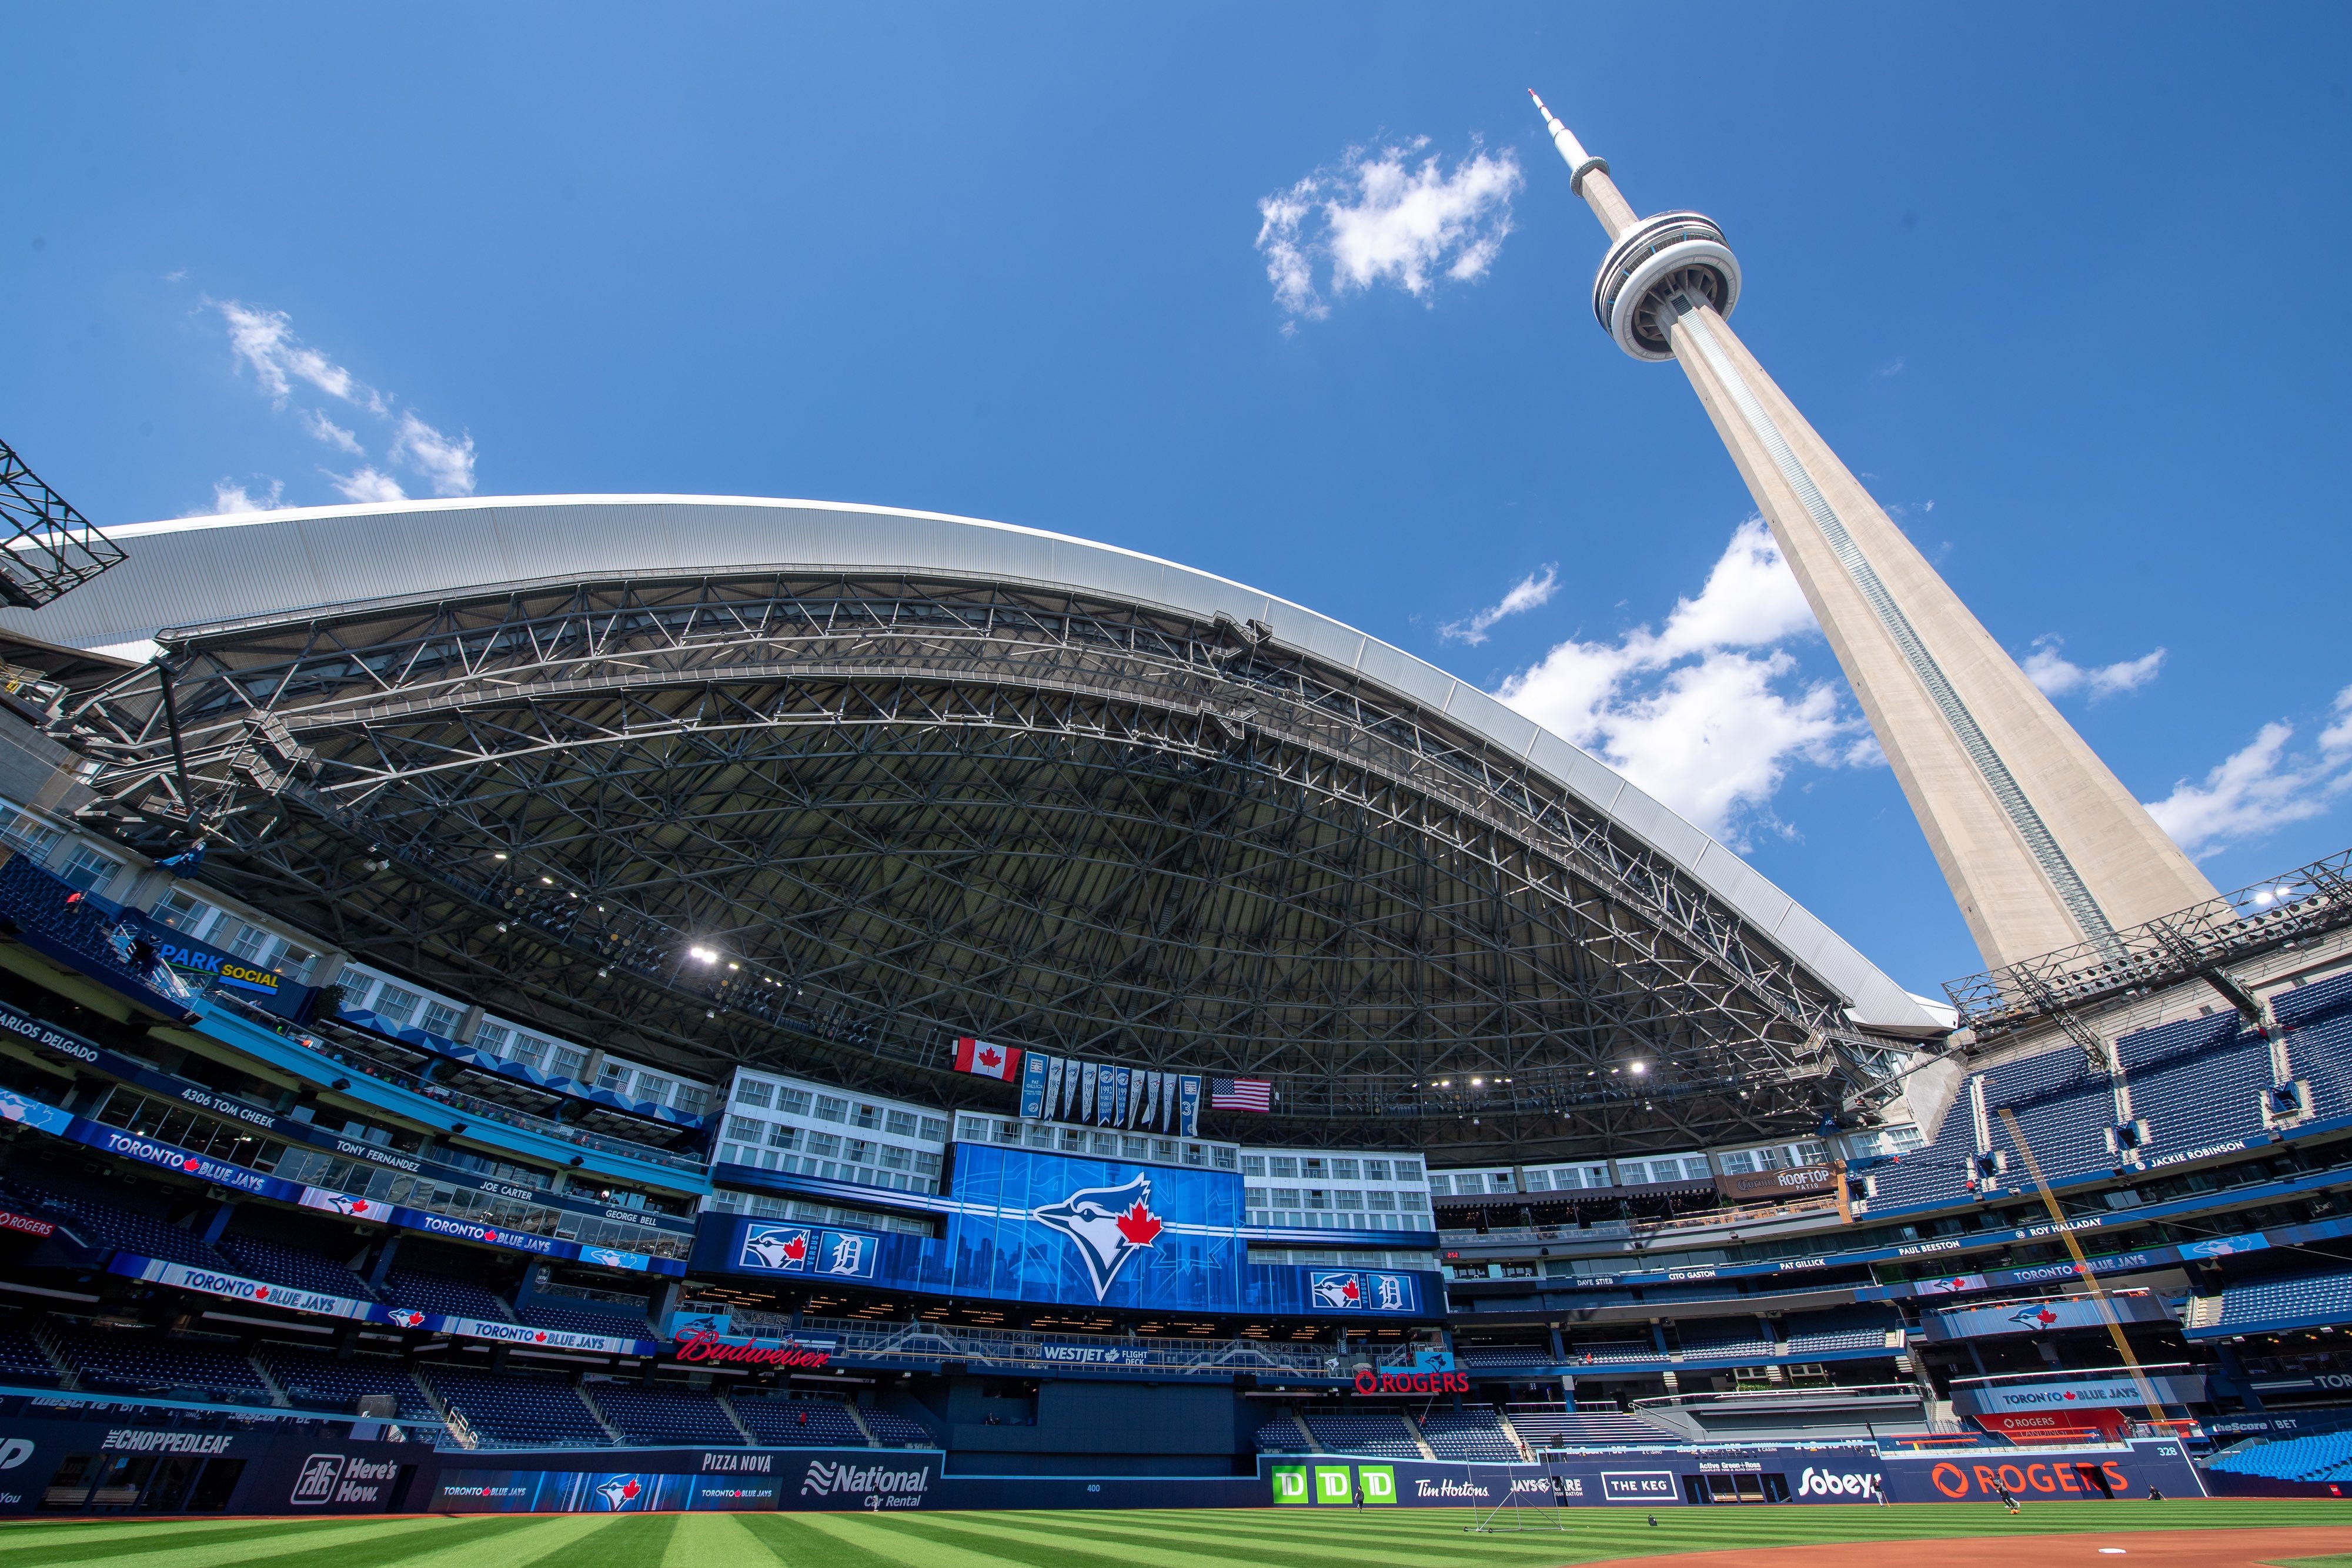 Blue Jays Happy Hour - Episode 93: Turtlenecks and Poutine Dogs